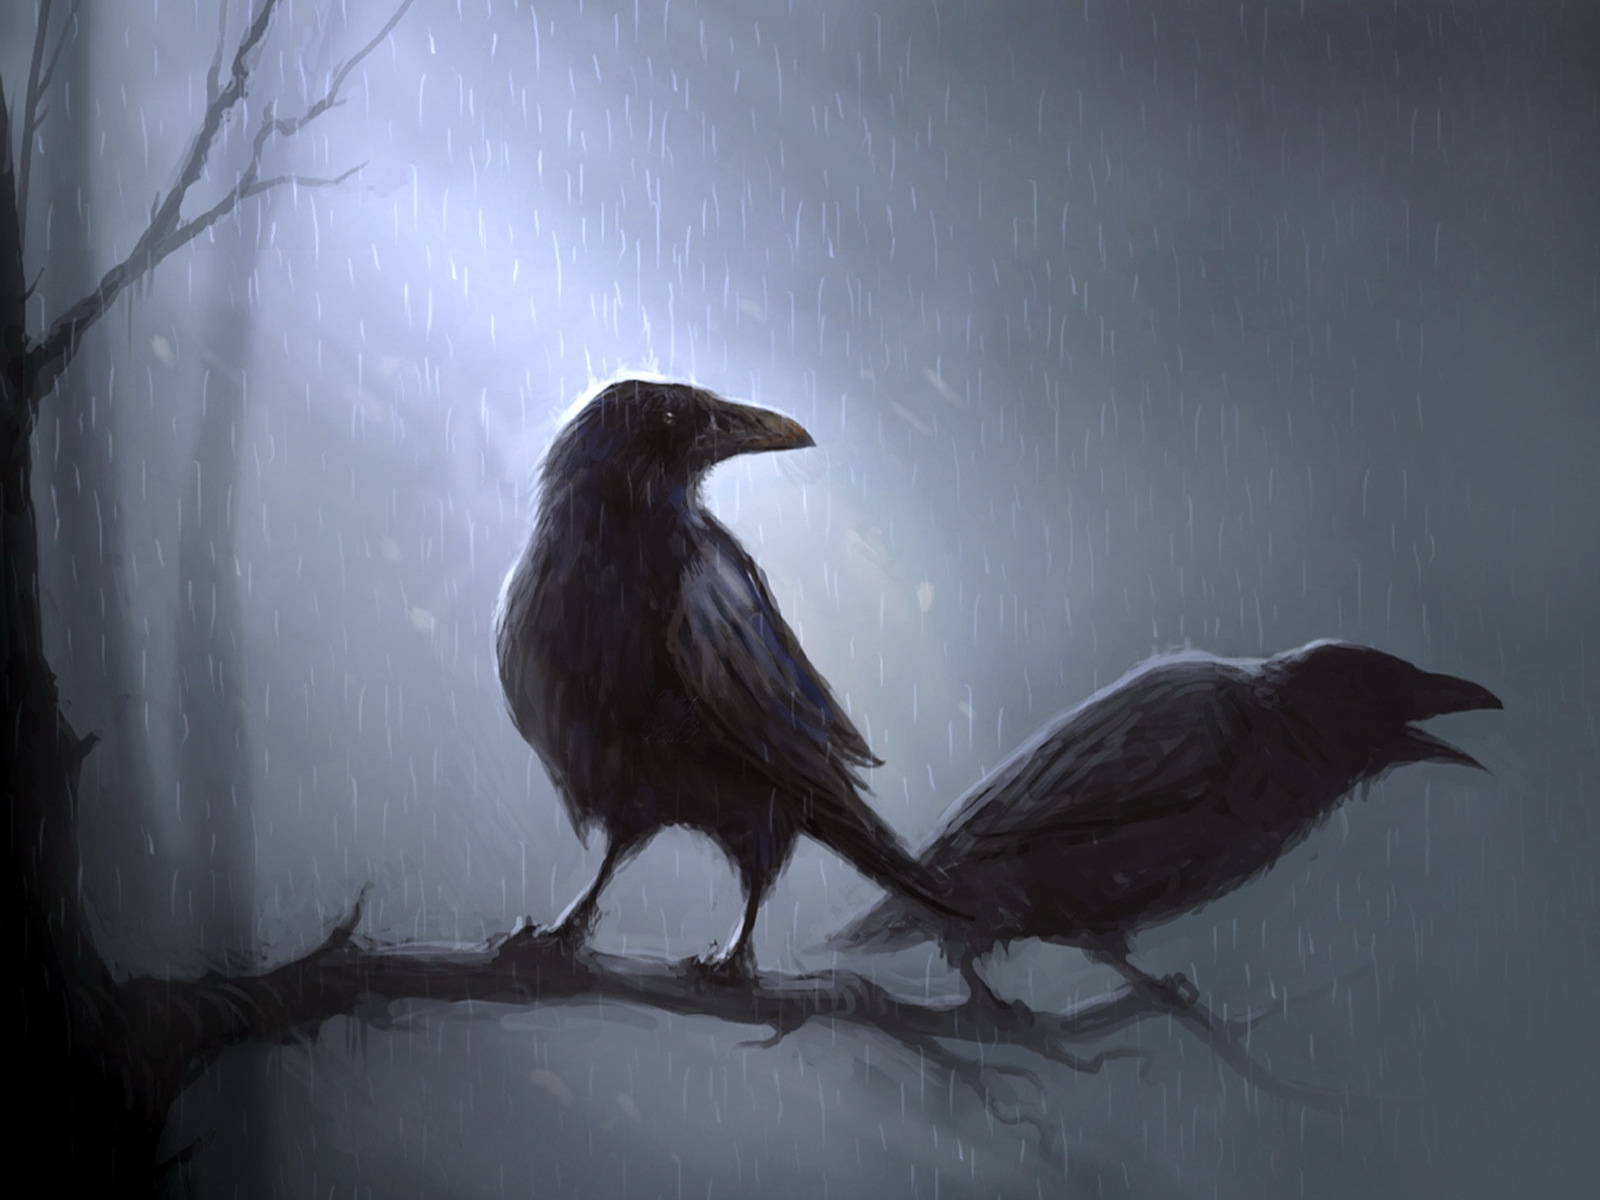 Drawn_wallpapers_Crows_in_the_rain_014315_.jpg